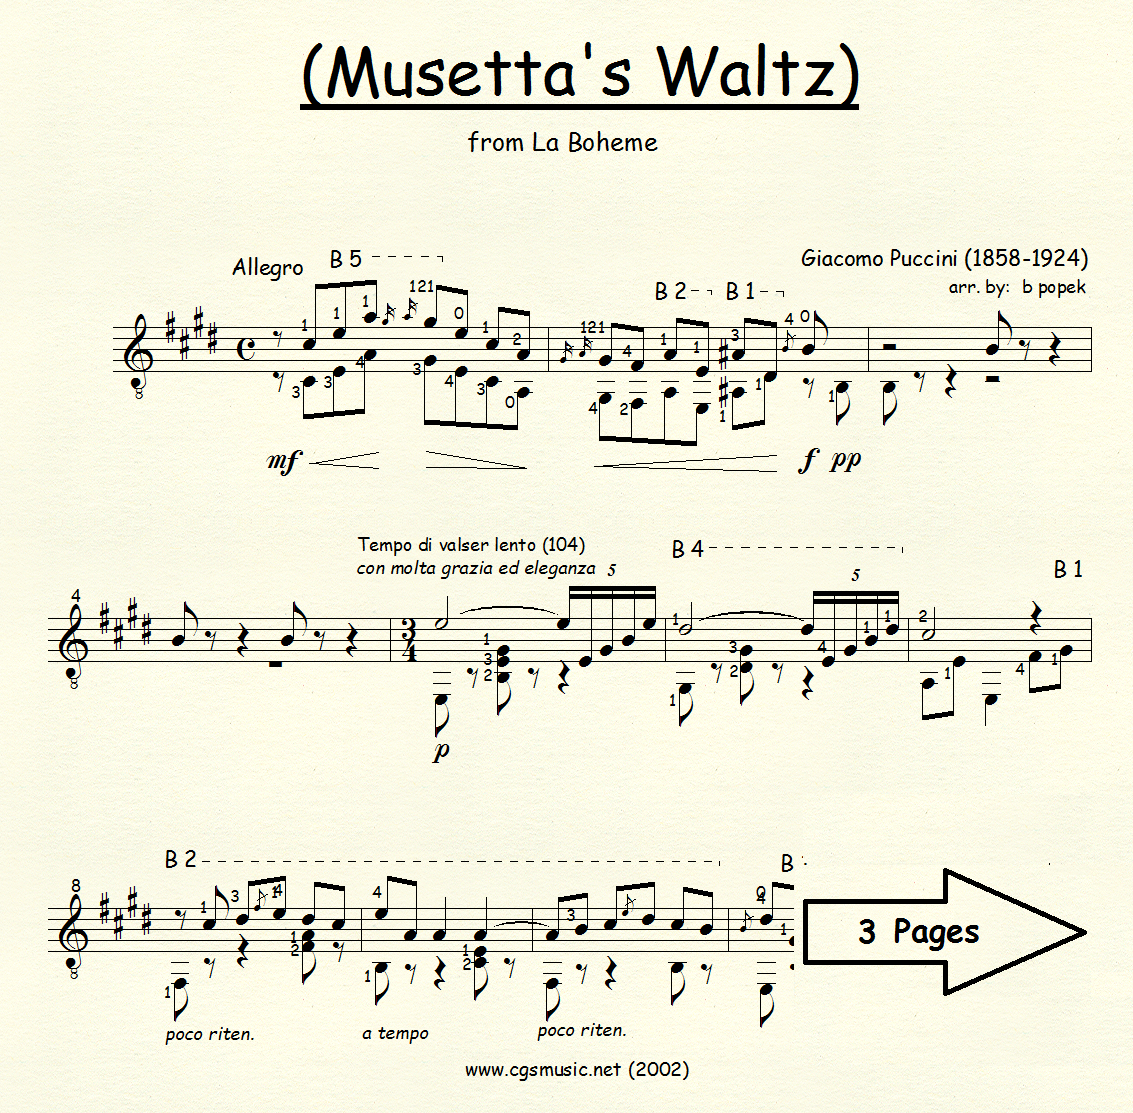 Musetta's Waltz (Puccini) for Classical Guitar in Standard Notation